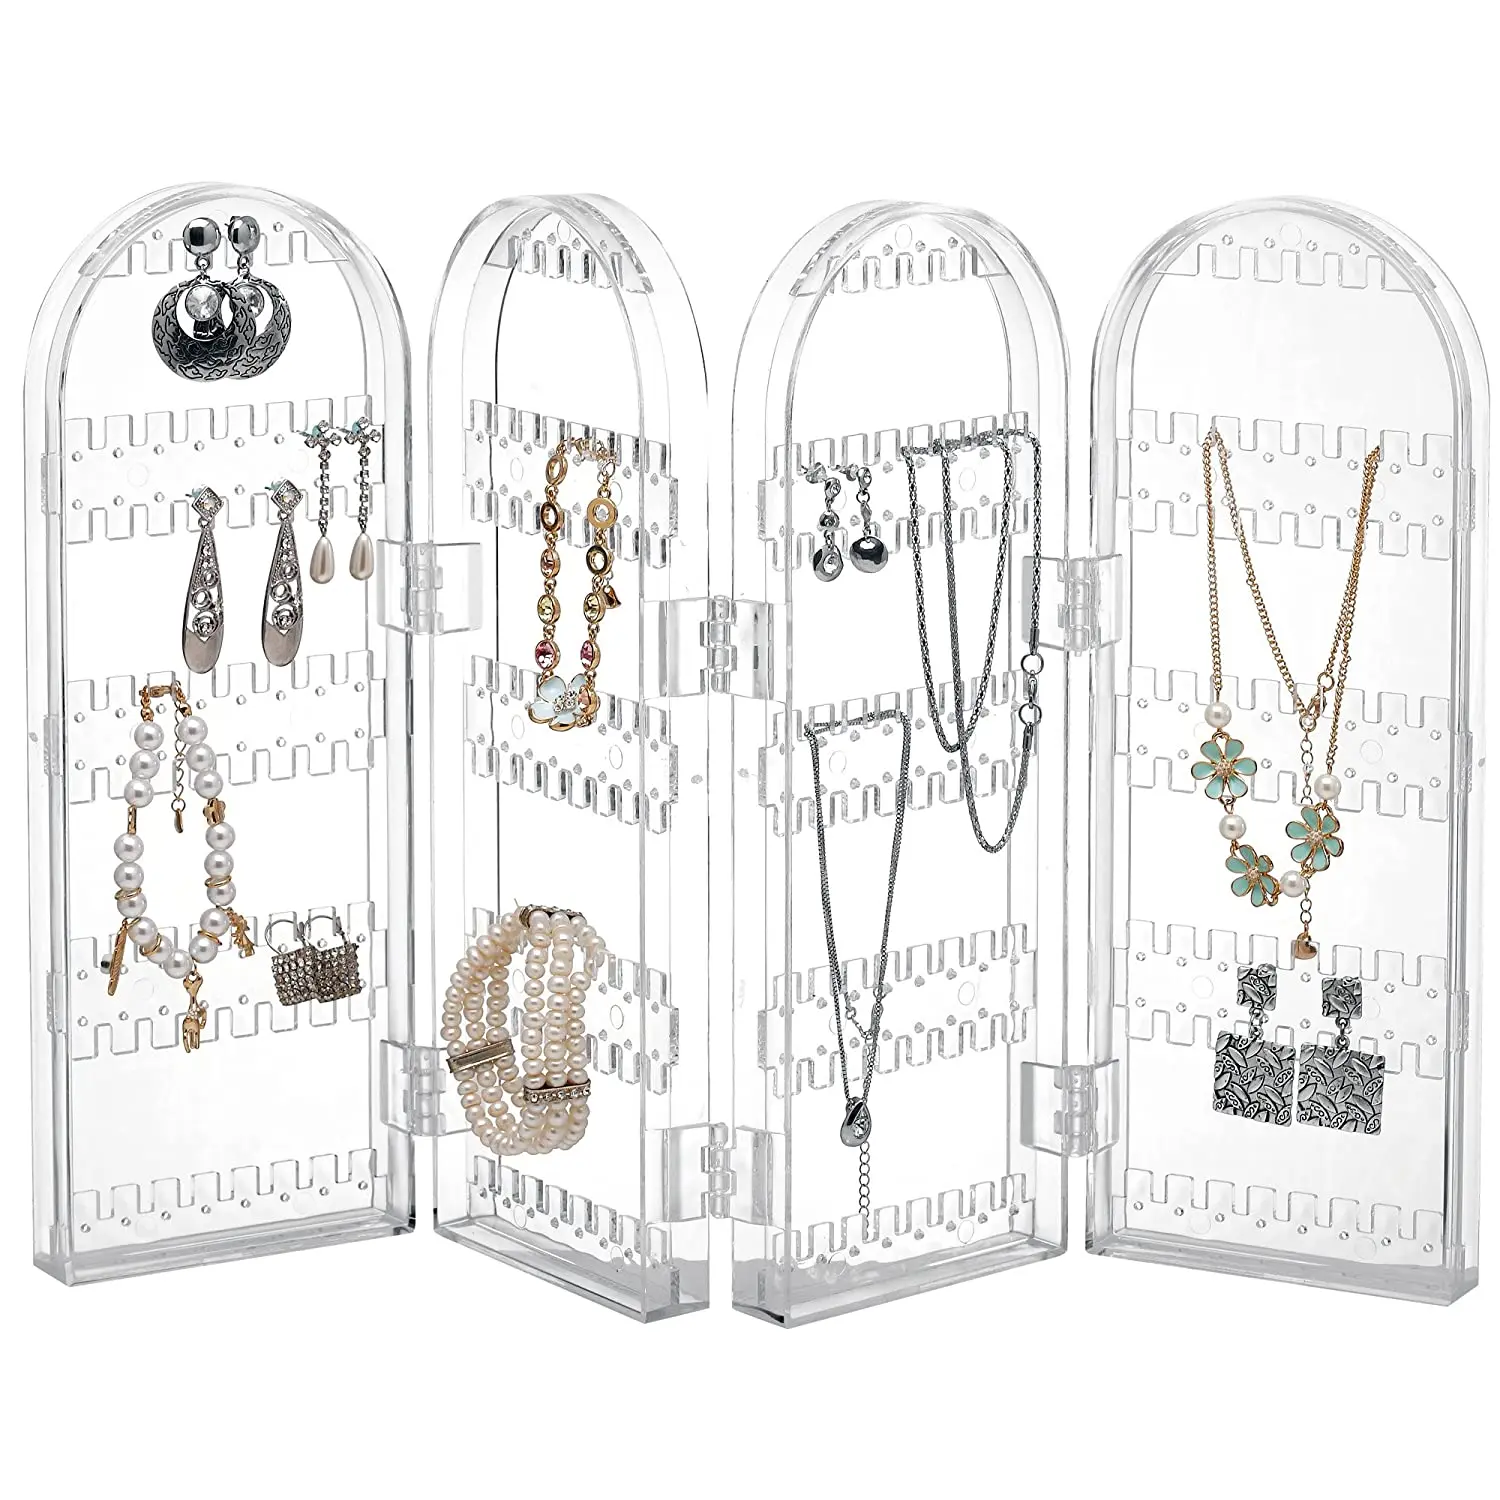 Double Screen Foldable Jewelry Hanger Stand for Earrings Necklaces Display 